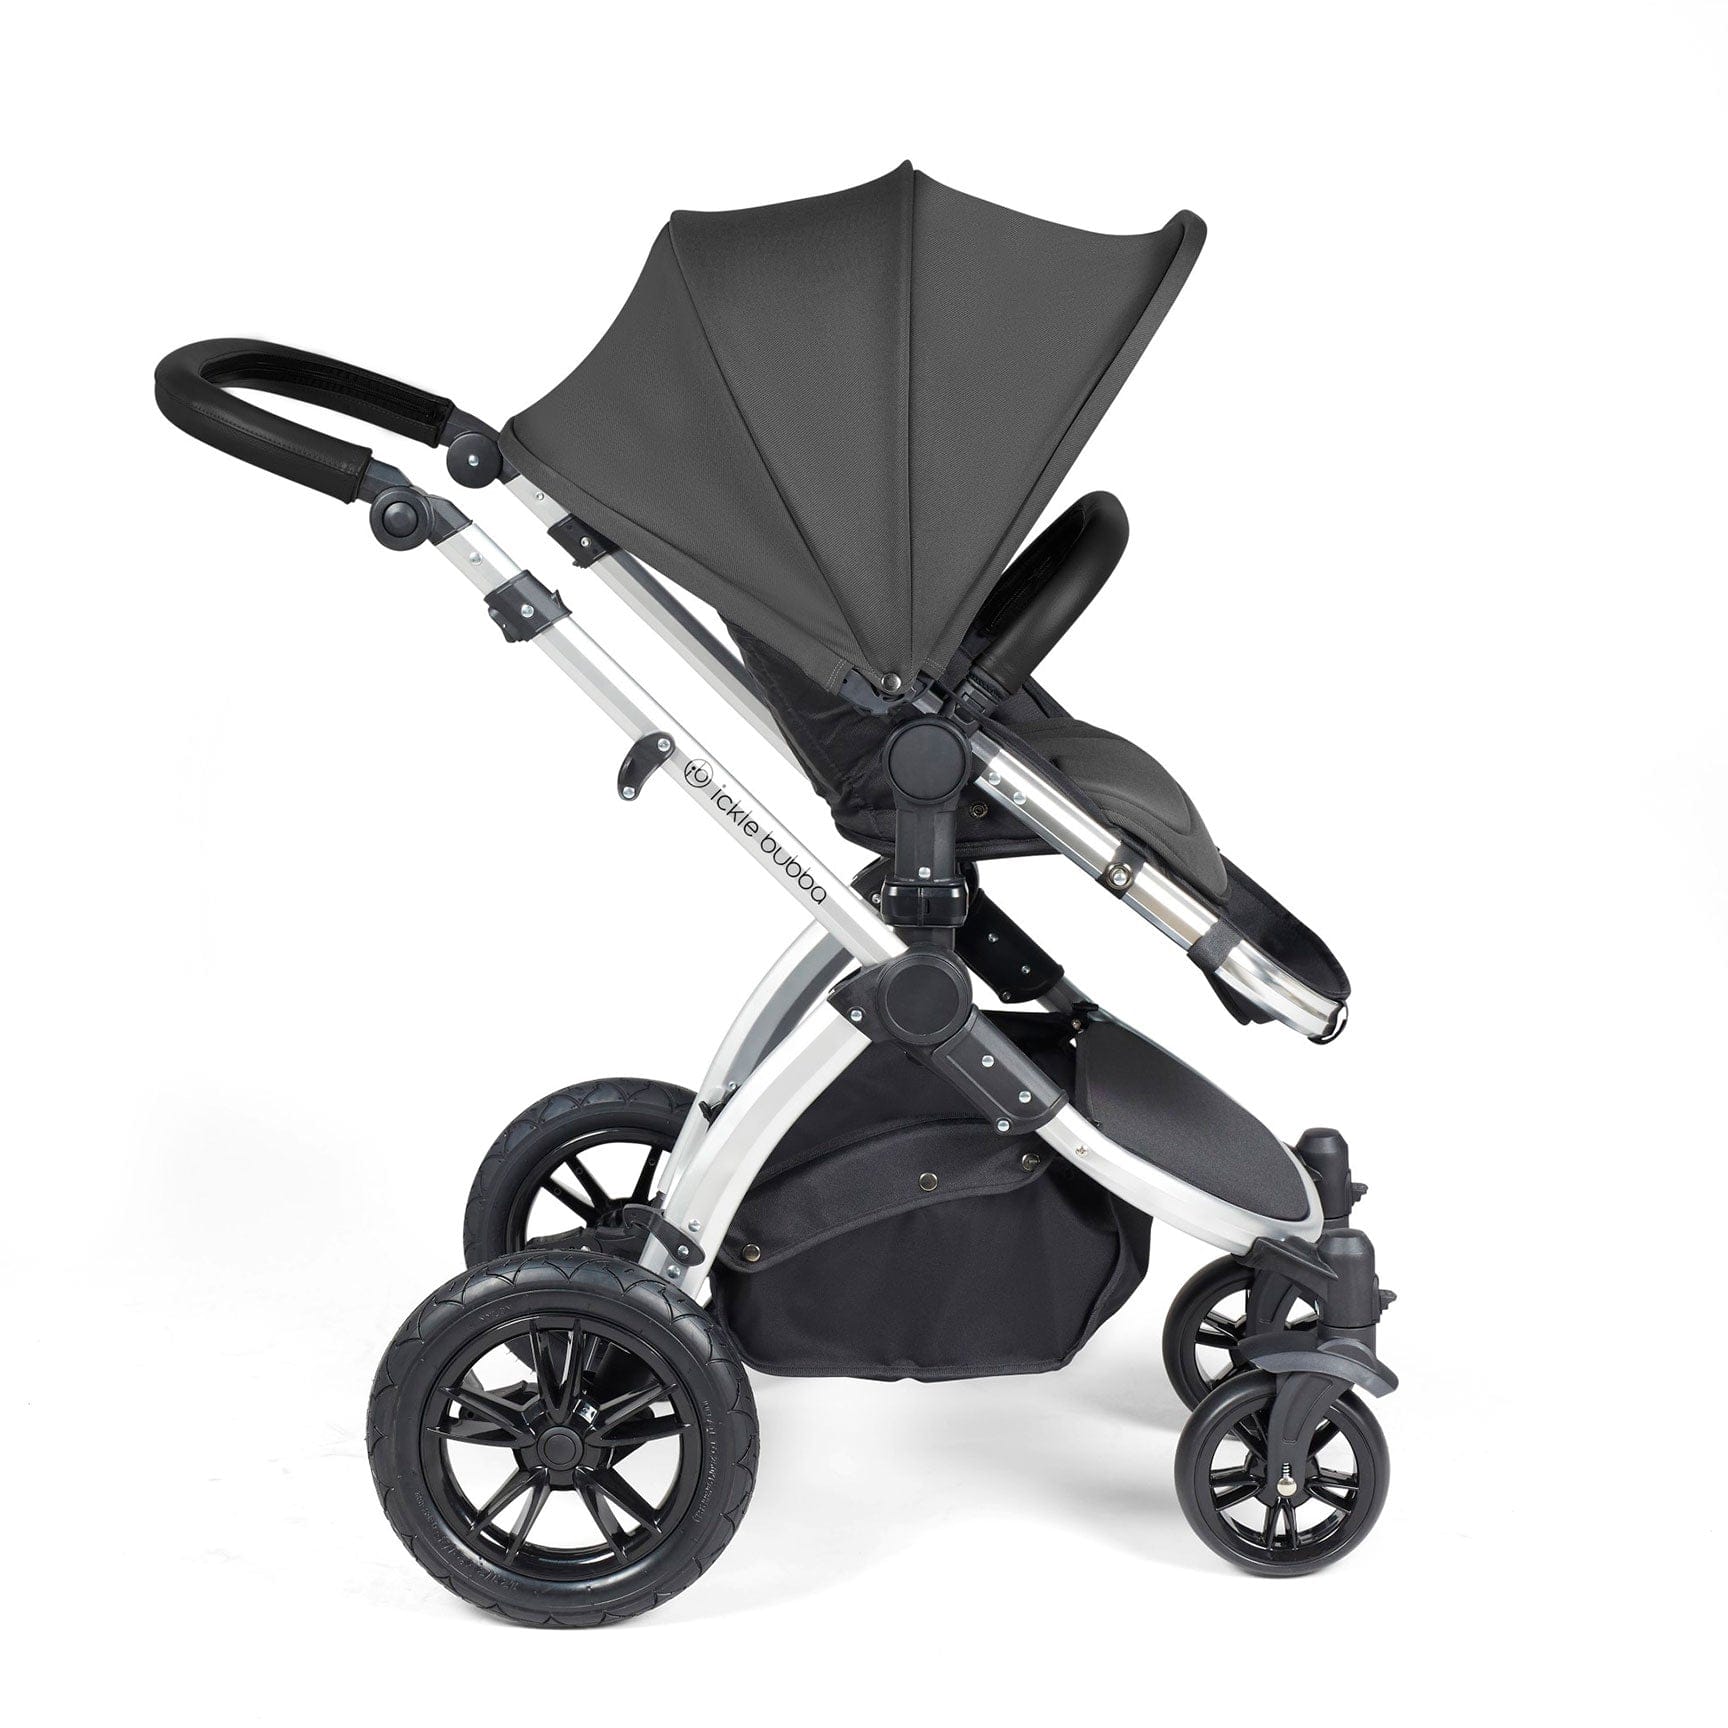 Ickle Bubba Stomp Luxe All-in-One Travel System with Isofix Base in Silver/Charcoal Grey/Black Travel Systems 10-011-300-254 5056515026559